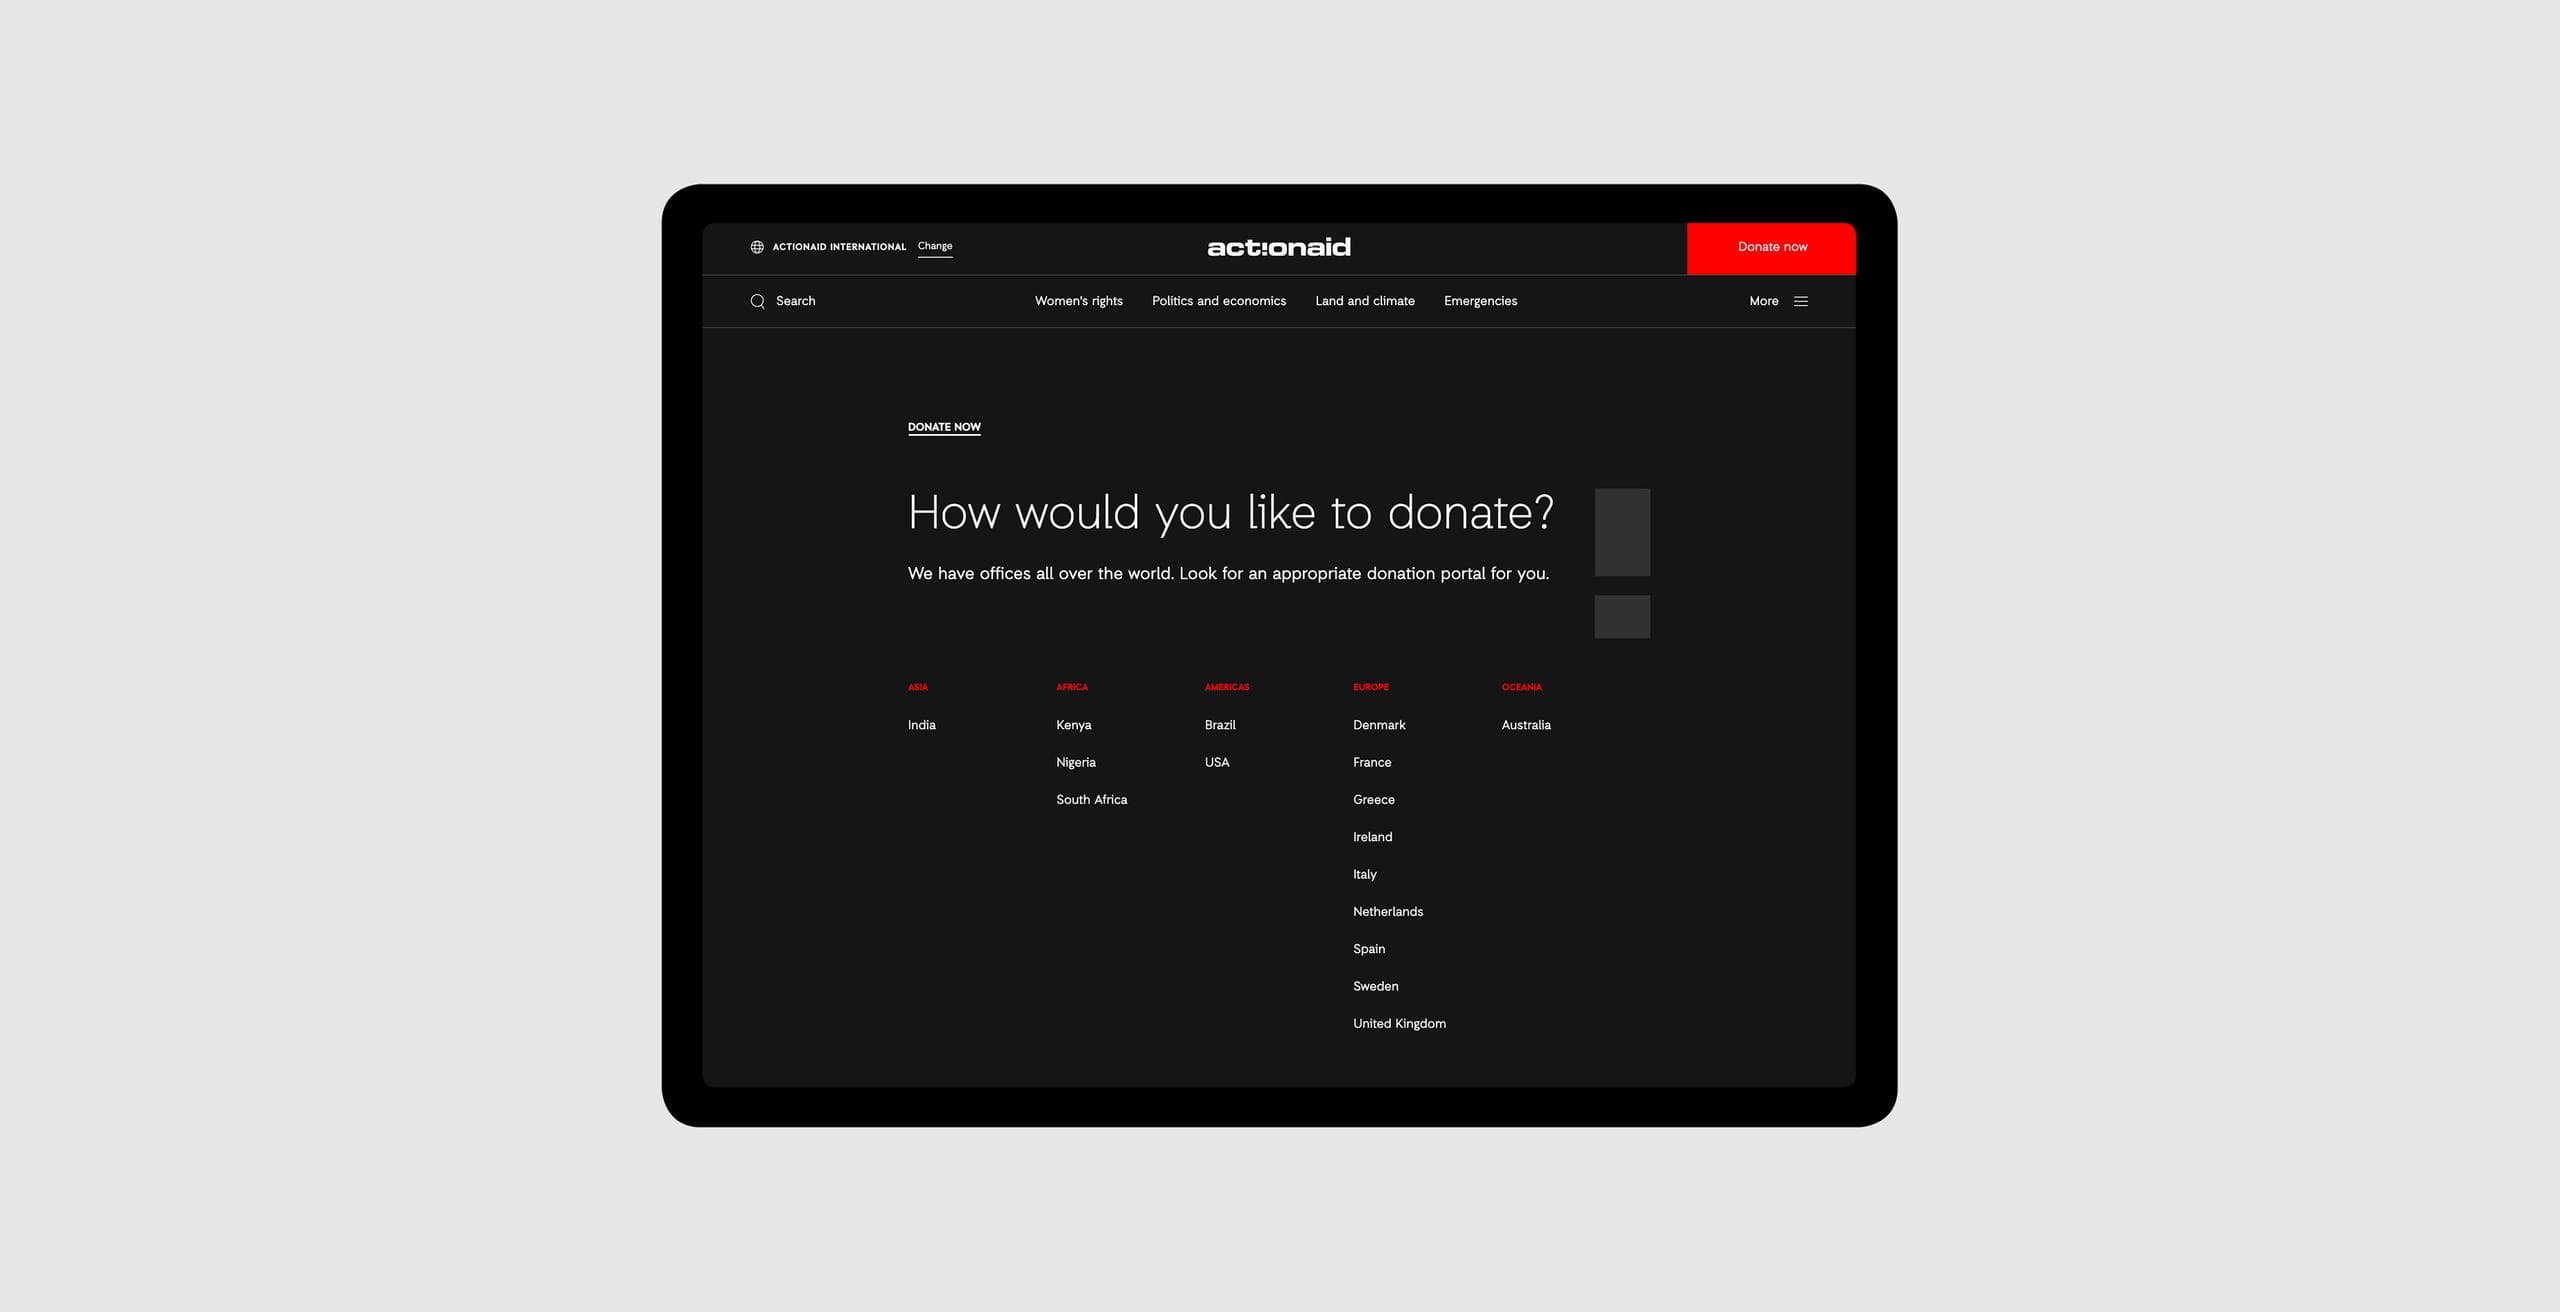 The donate page